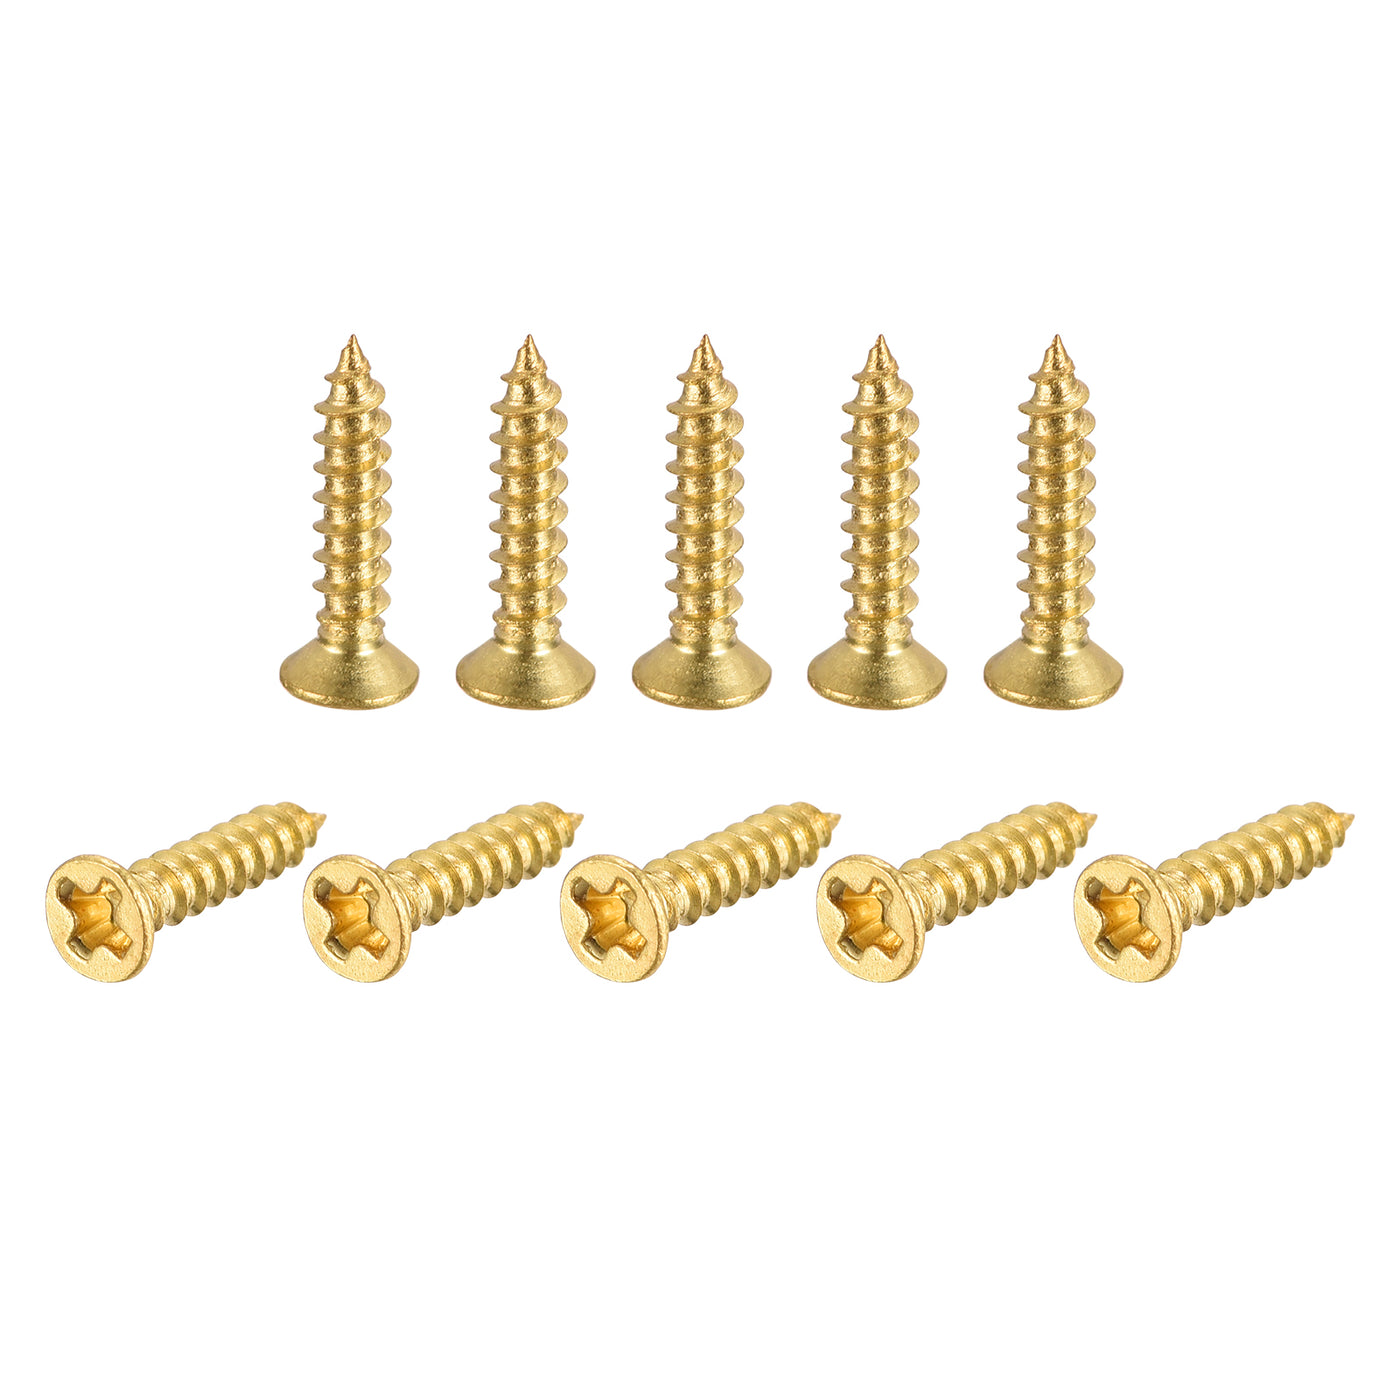 uxcell Uxcell Brass Wood Screws, M2x10mm Phillips Flat Head Self Tapping Connector for Door, Cabinet, Wooden Furniture 25Pcs